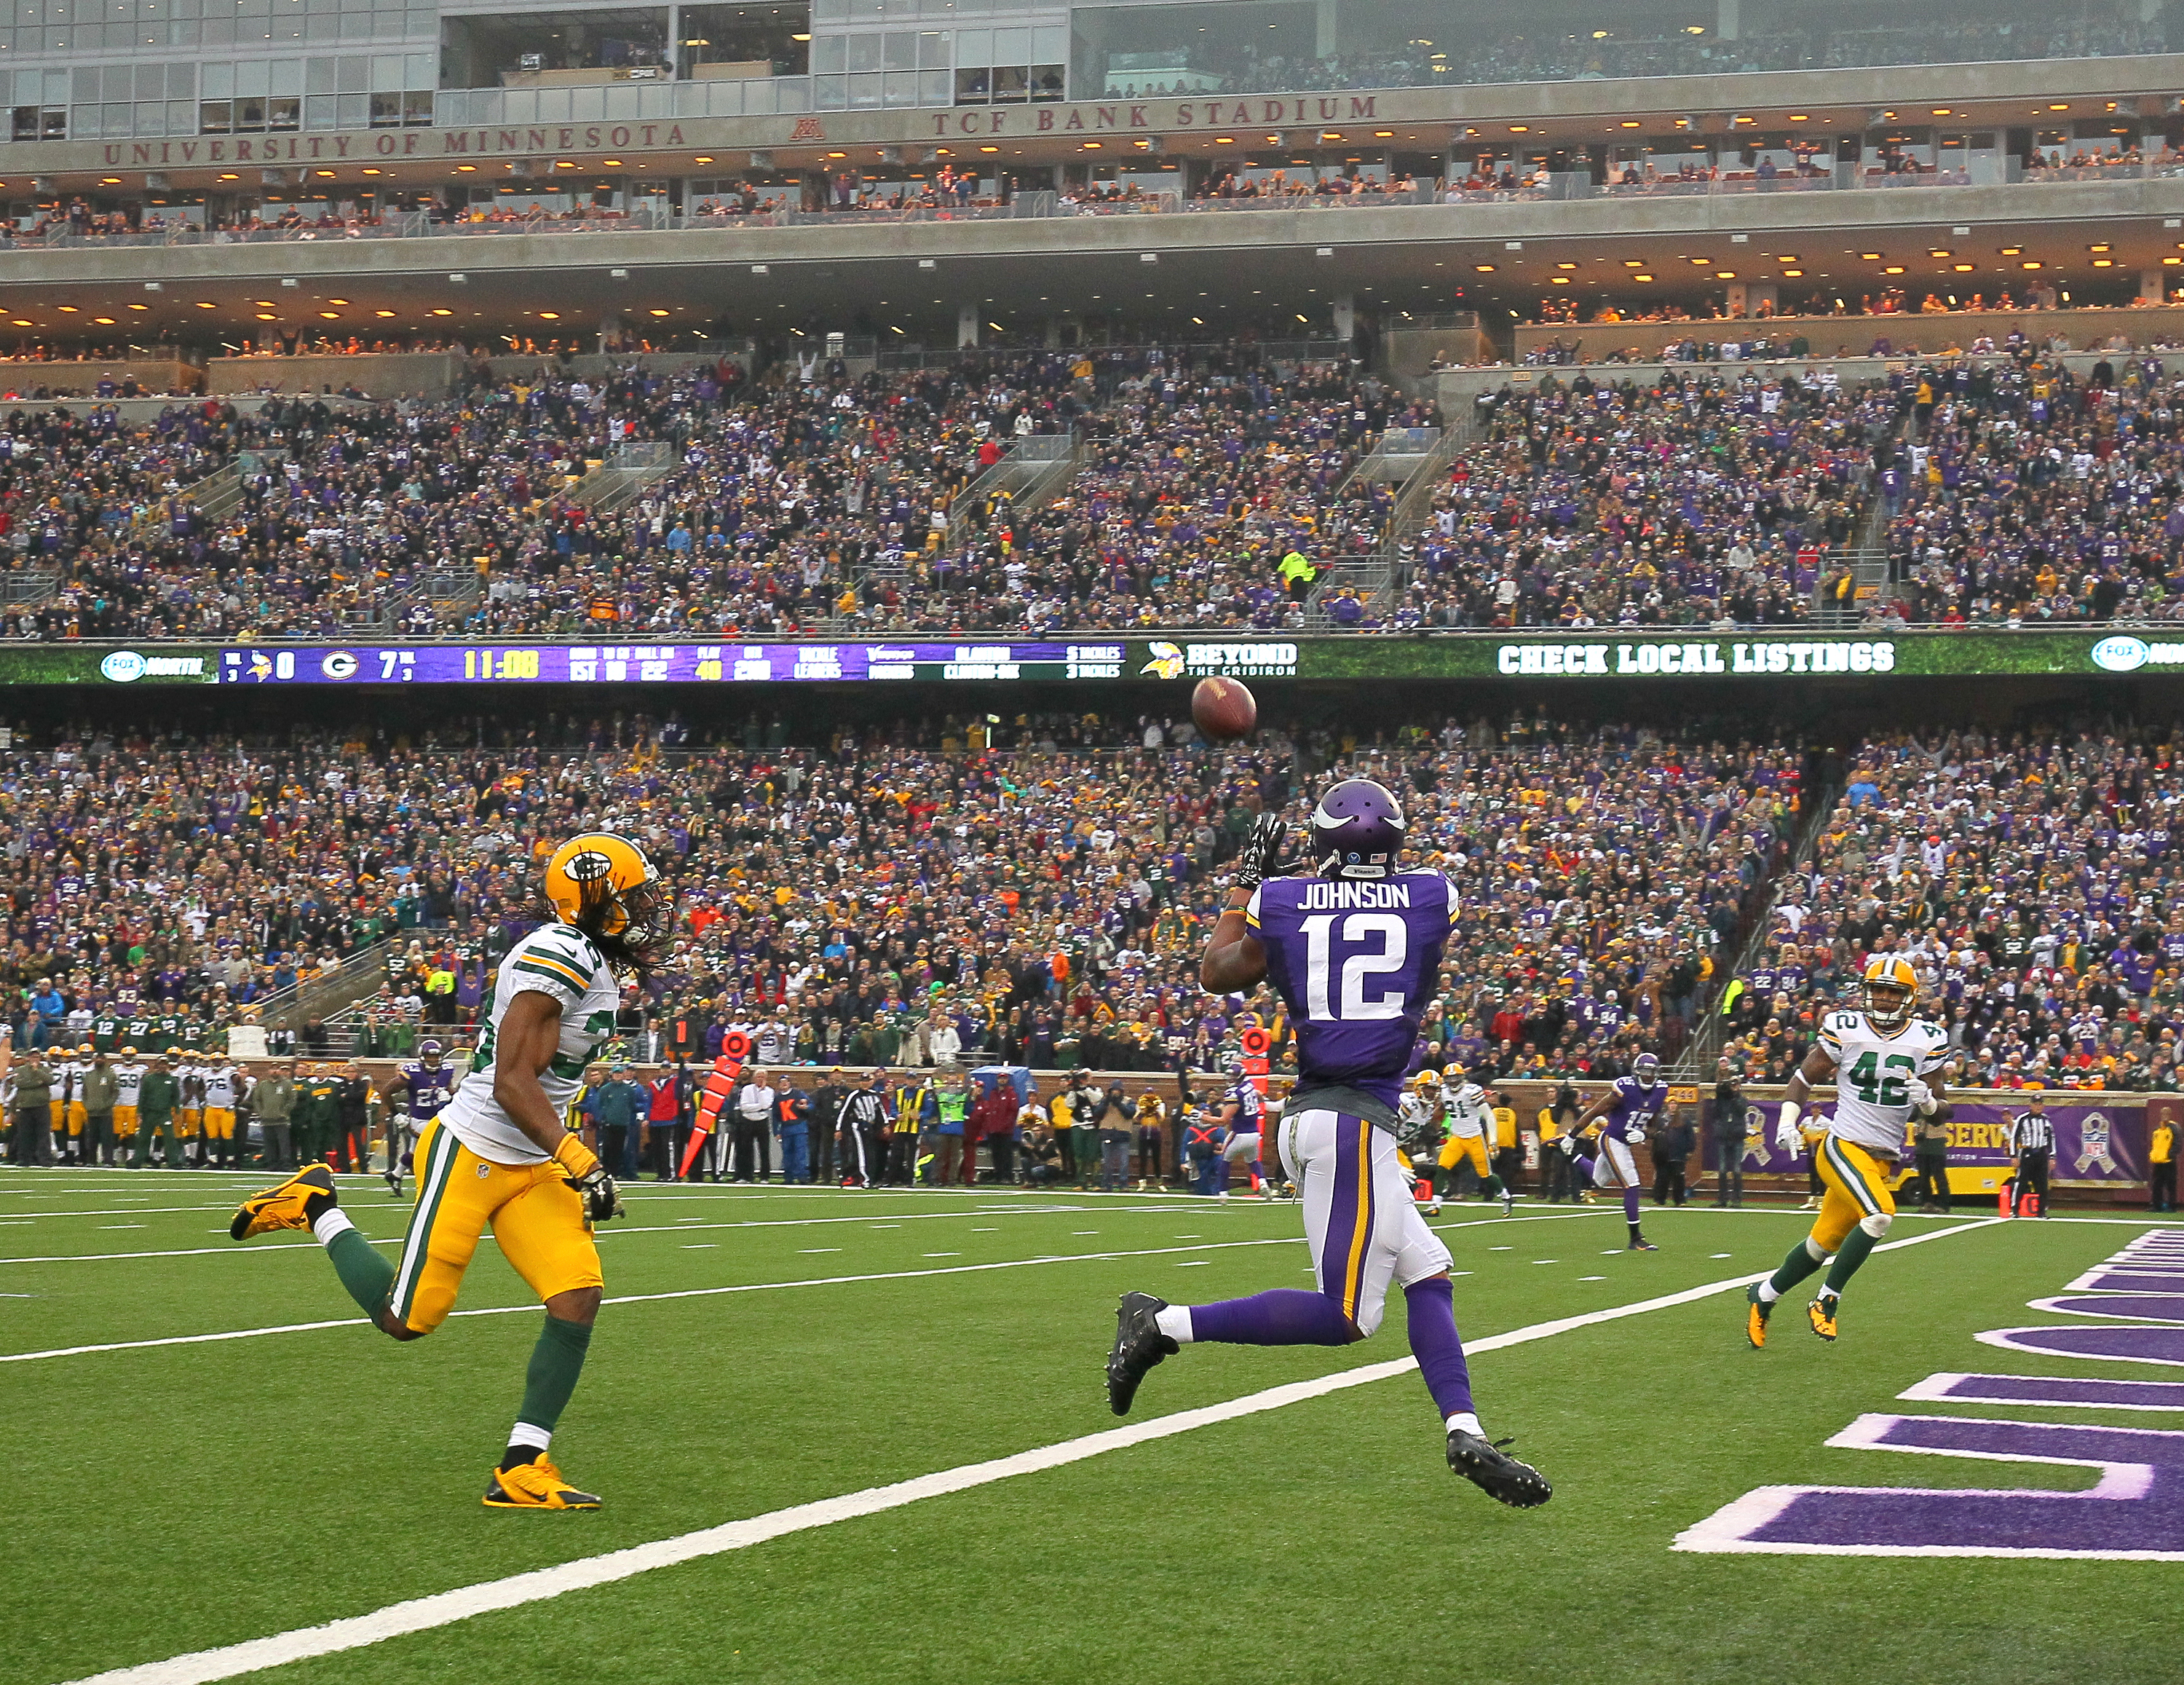 Vikings receiver Charles Johnson pulls in a touchdown while Tramon Williams of the Green Bay Packers watches. (Photo by Adam Bettcher/Getty Images)